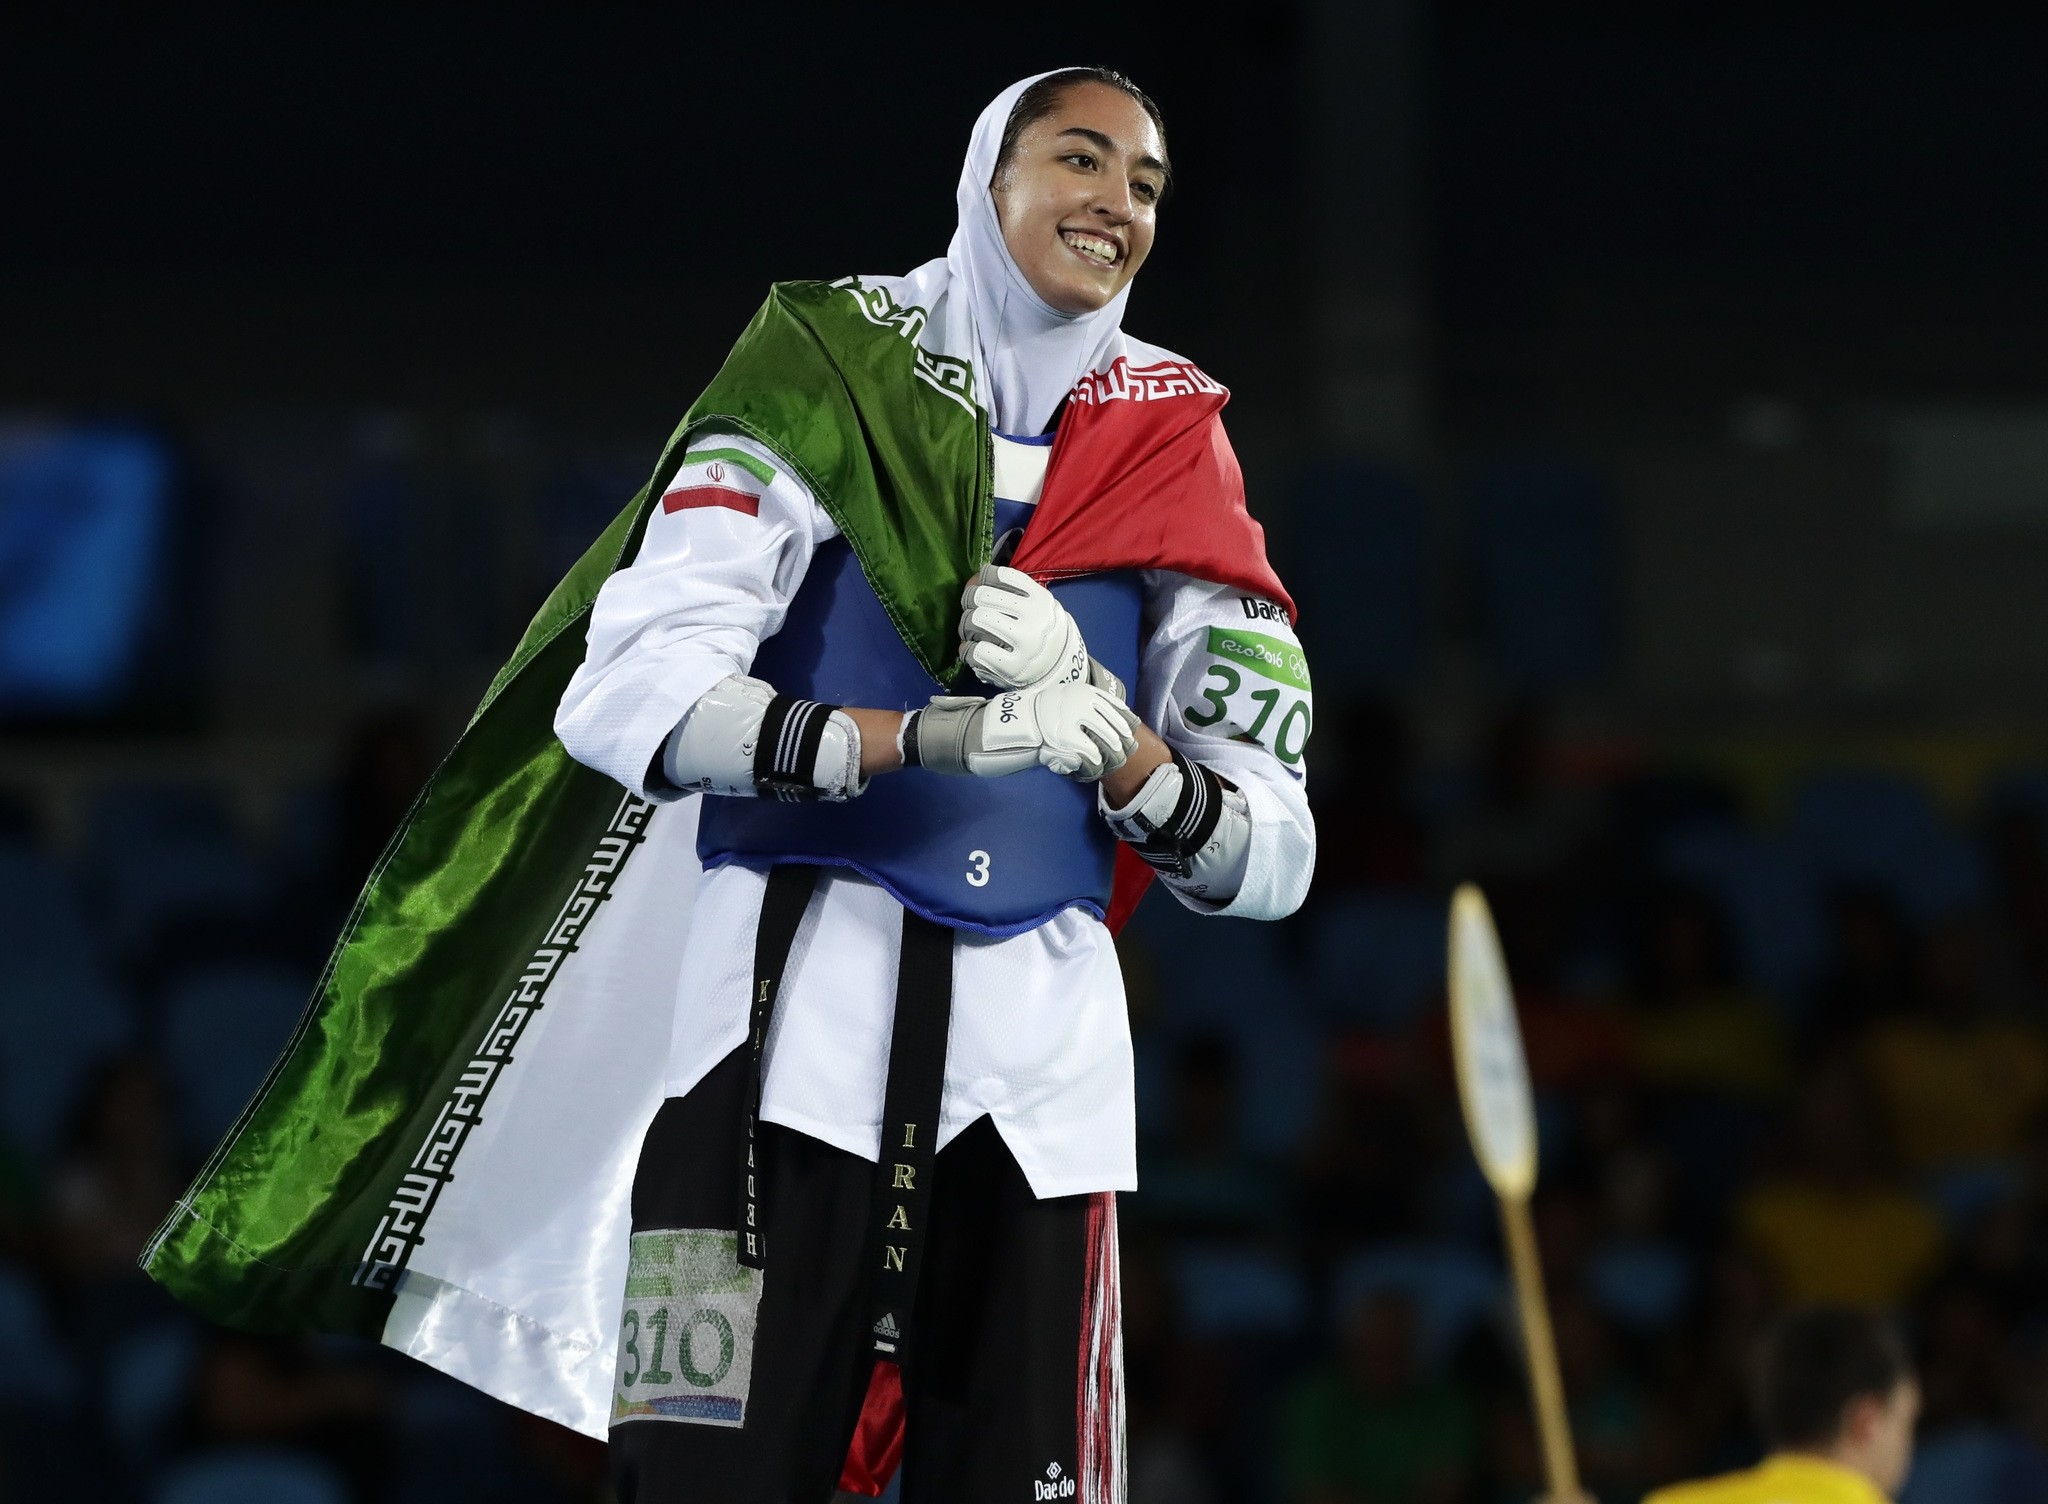 Kimia Alizadeh Zenoorin, of Iran, celebrates after winning a bronze medal in women's 57-kg taekwondo competition at the 2016 Summer Olympics in Rio de Janeiro, Brazil, Thursday, Aug. 18, 2016. (AP Photo)